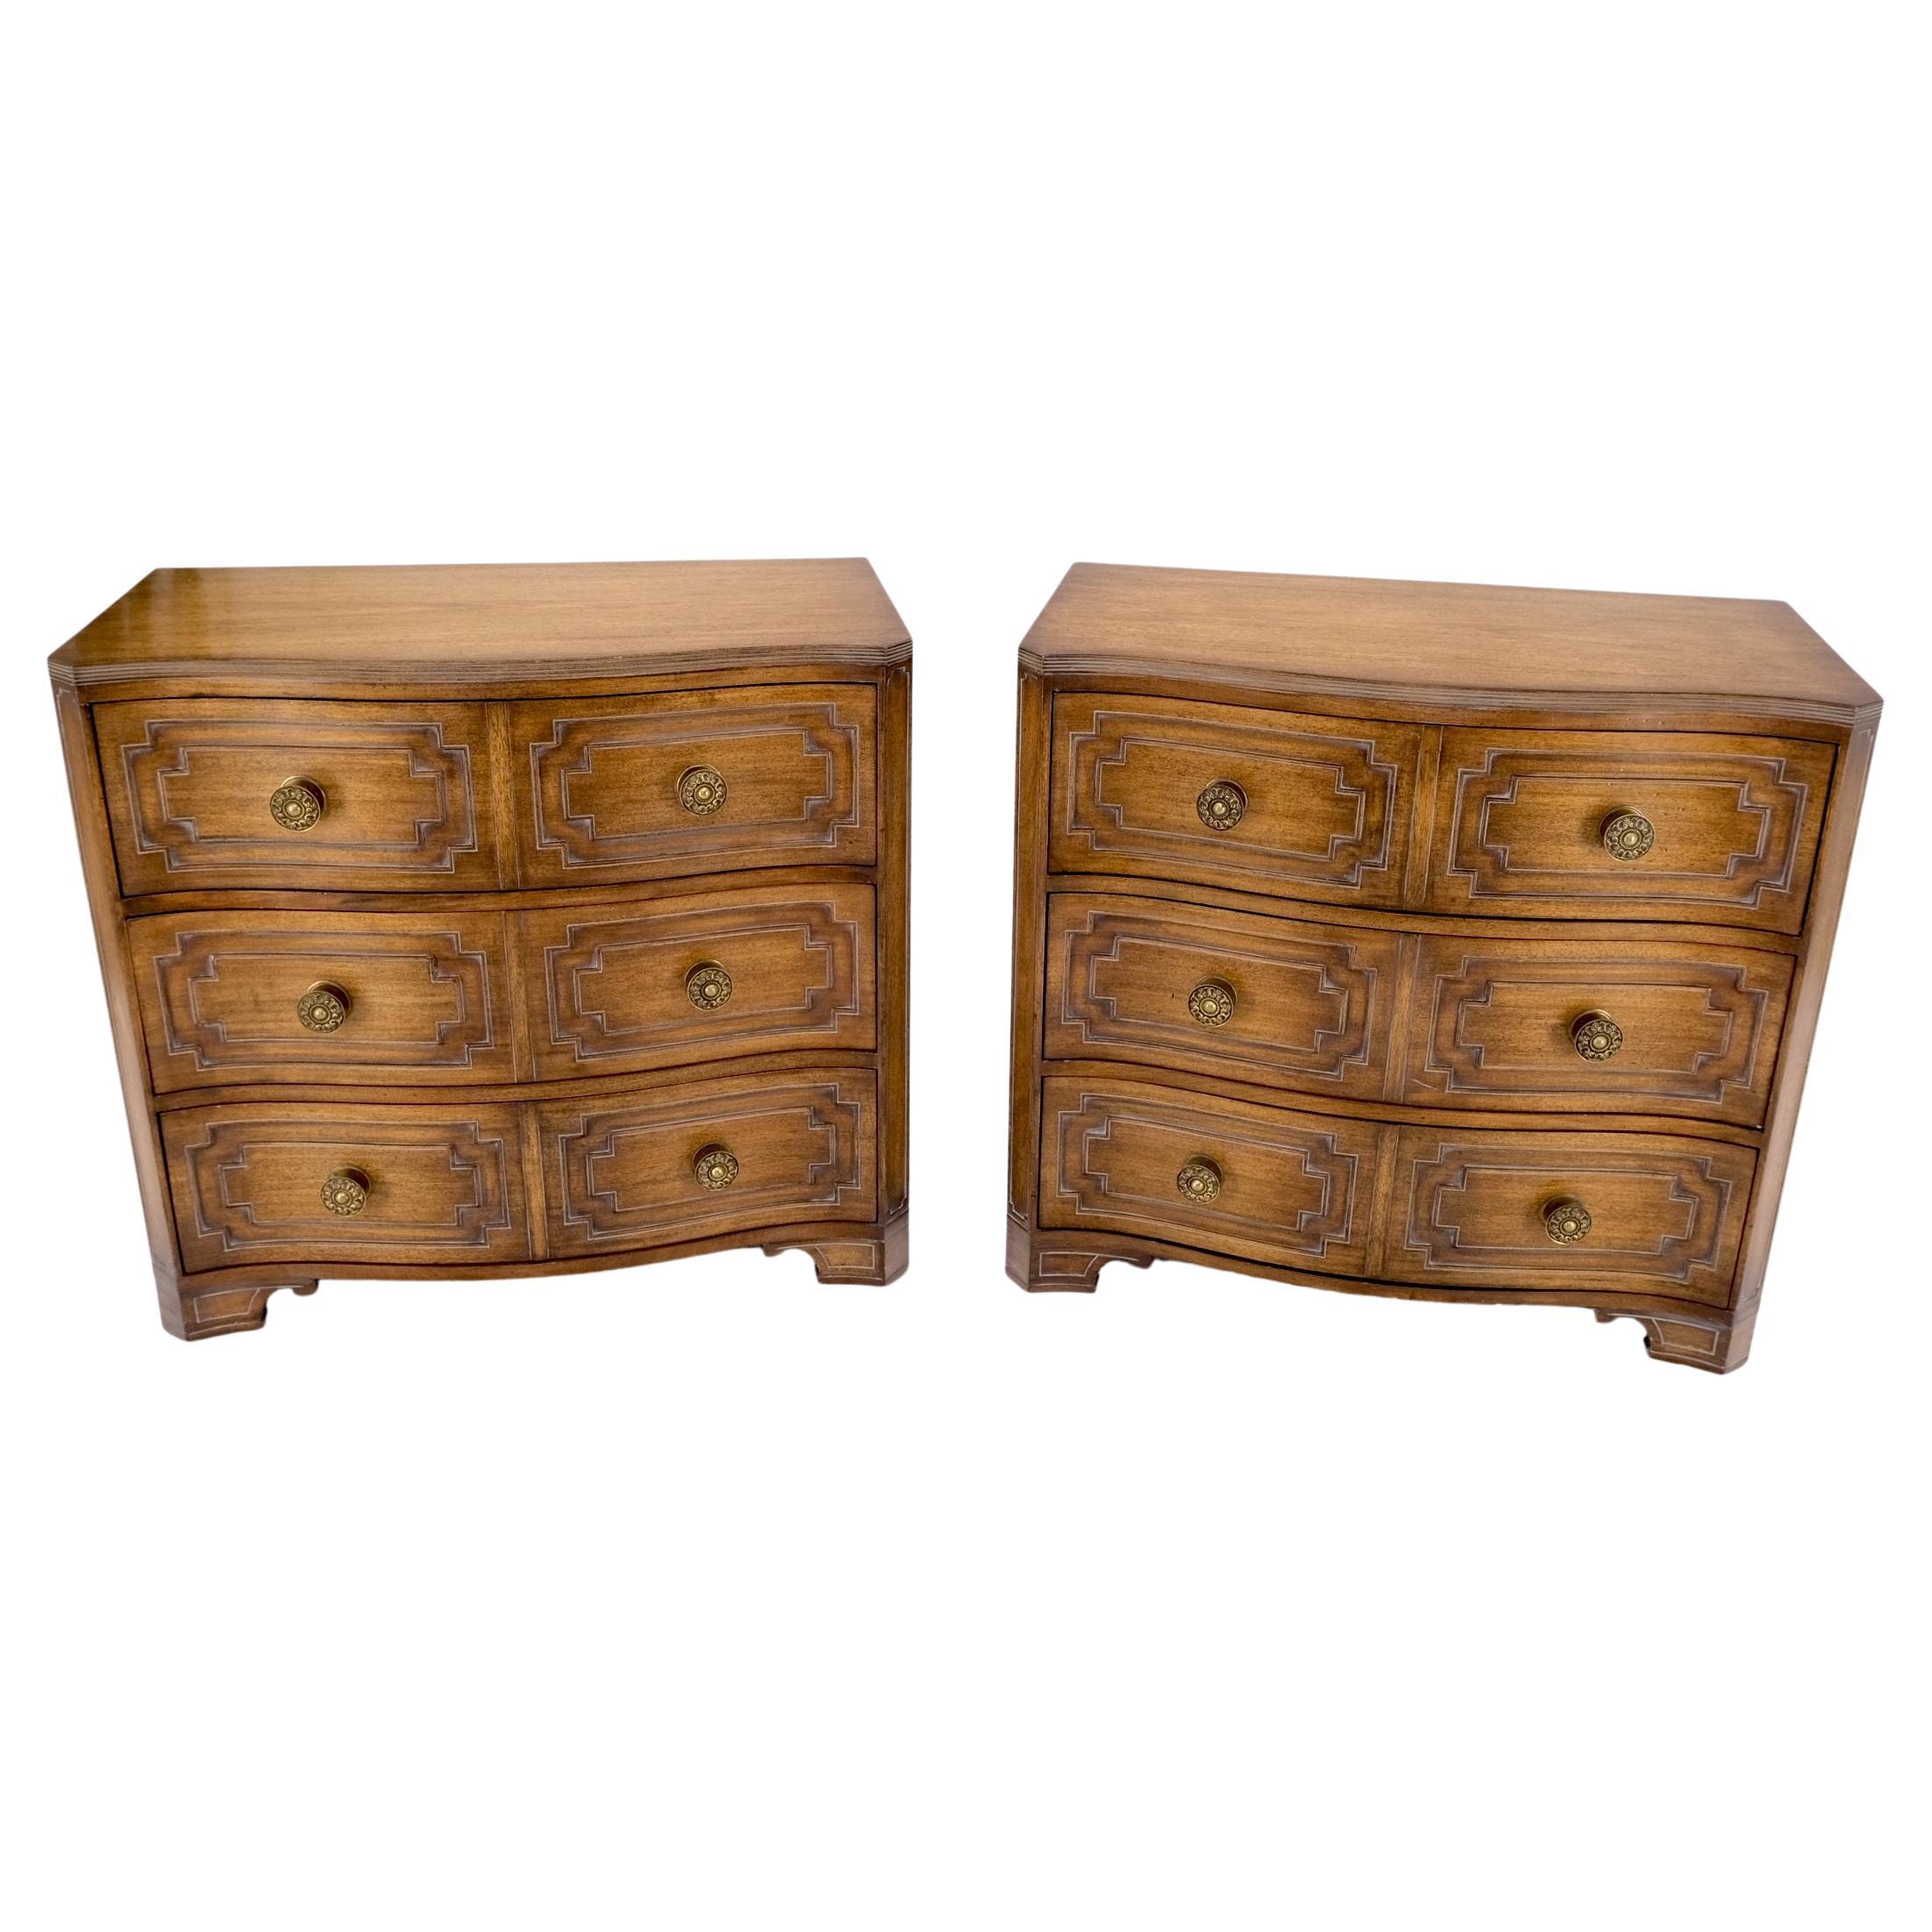 Pair of Mahogany Bow Serpentine Front 3 Drawers Bachelor Chests Grossfeld House